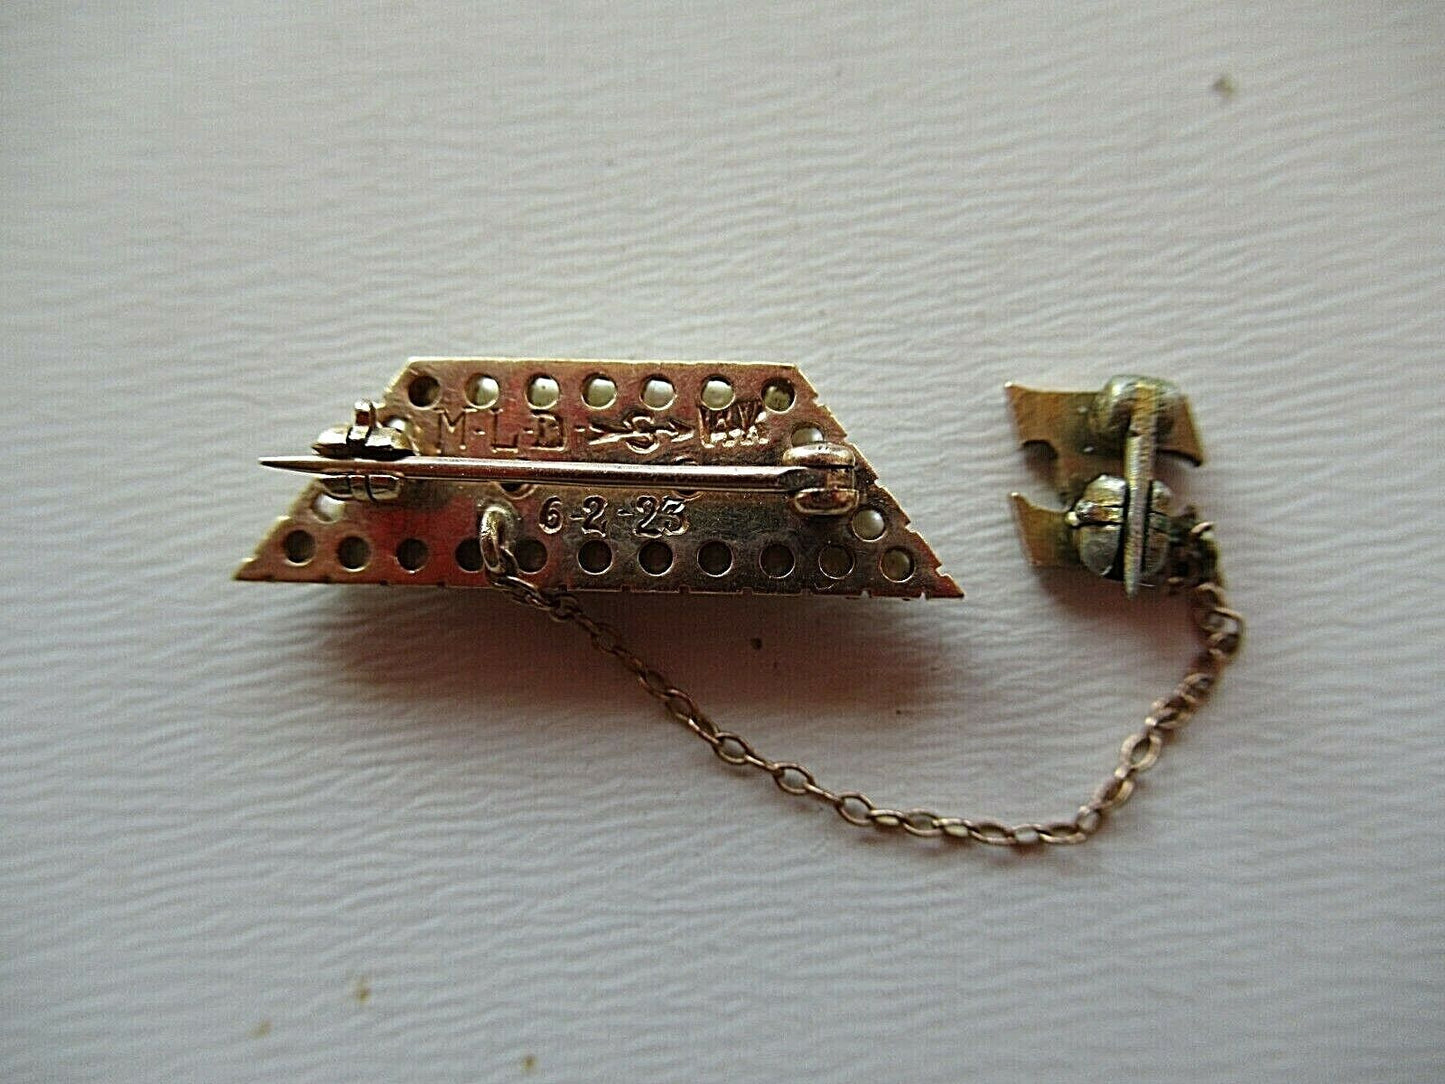 USA FRATERNITY PIN LAMBDA TAU DELTA. MADE IN GOLD. 1923. NAMED. MARKED